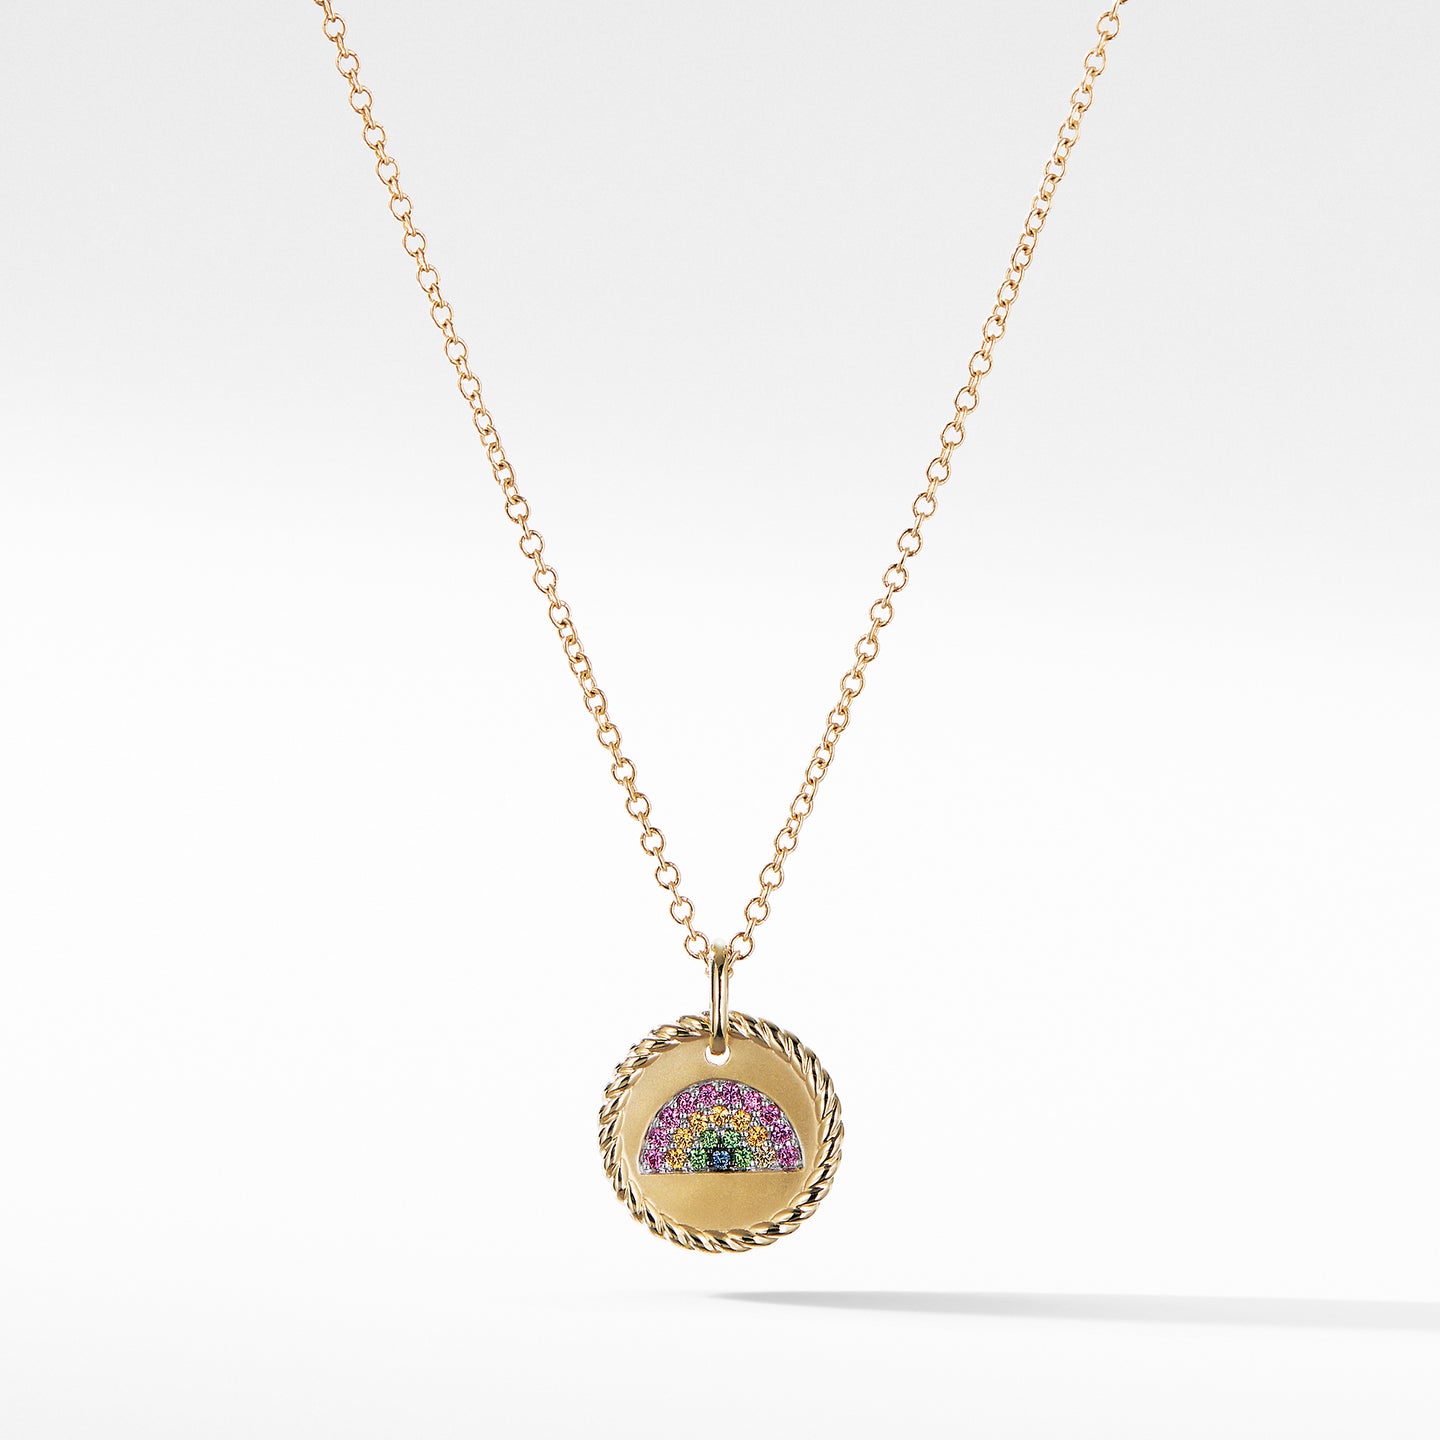 Cable Collectibles® Rainbow Necklace with Pink Sapphires, Yellow Sapphires, and Tsavorite in 18K Gold, 18